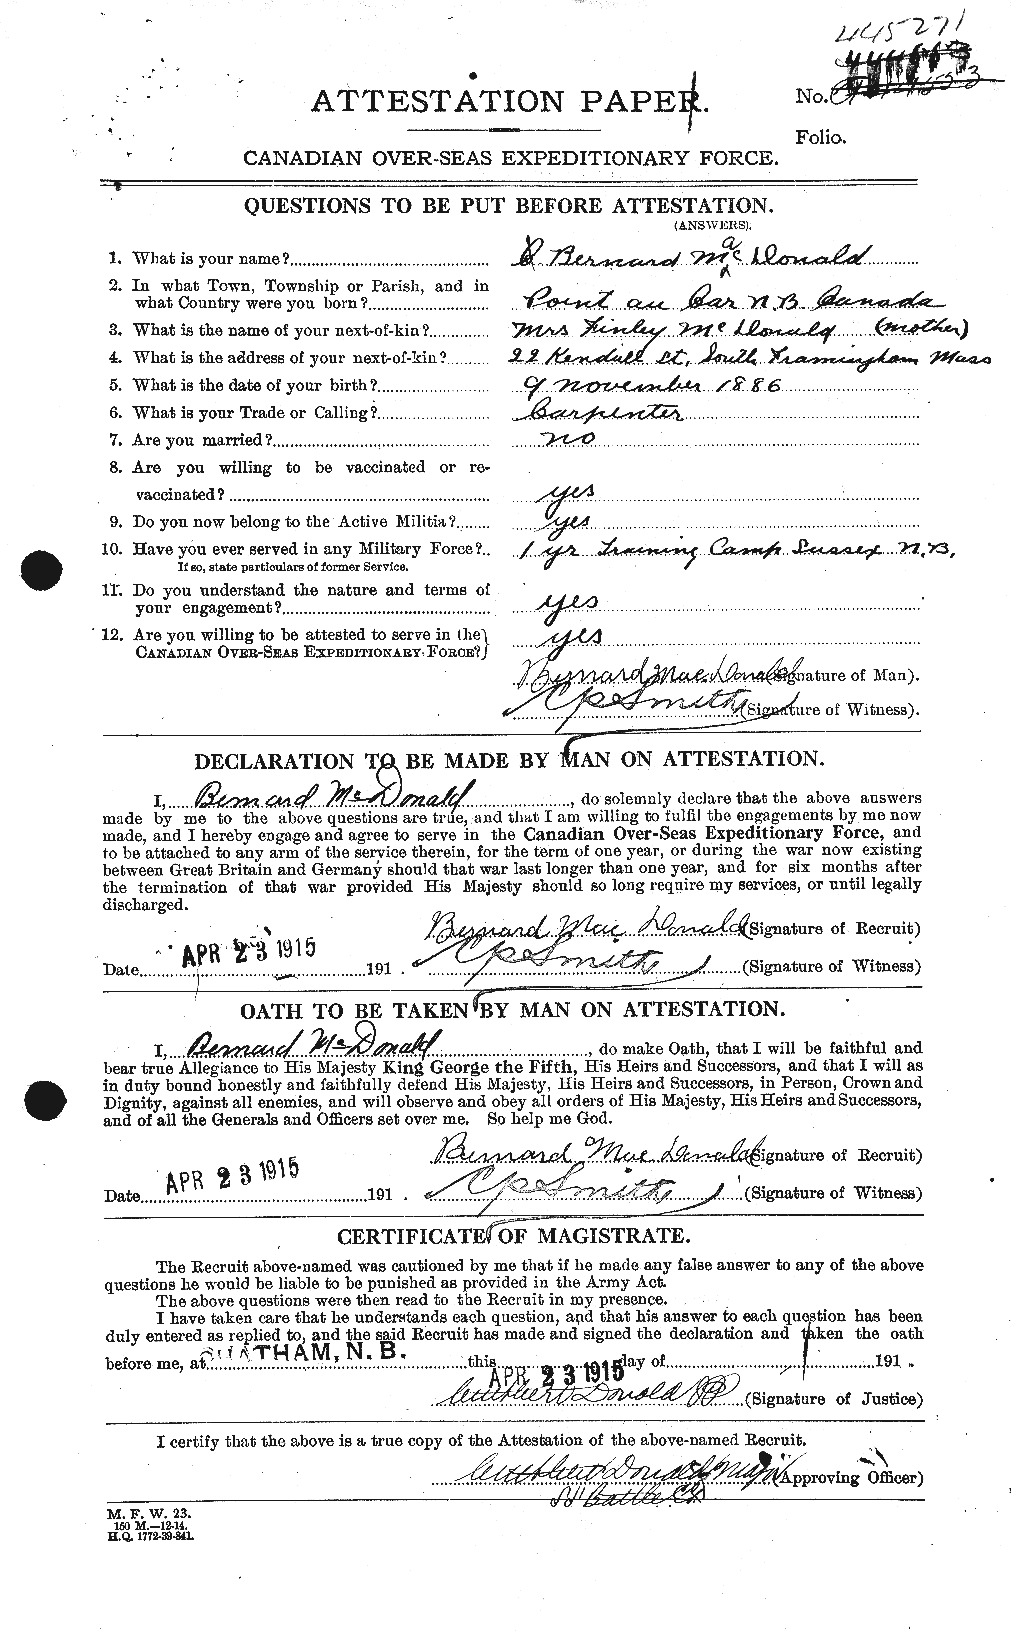 Personnel Records of the First World War - CEF 136516a